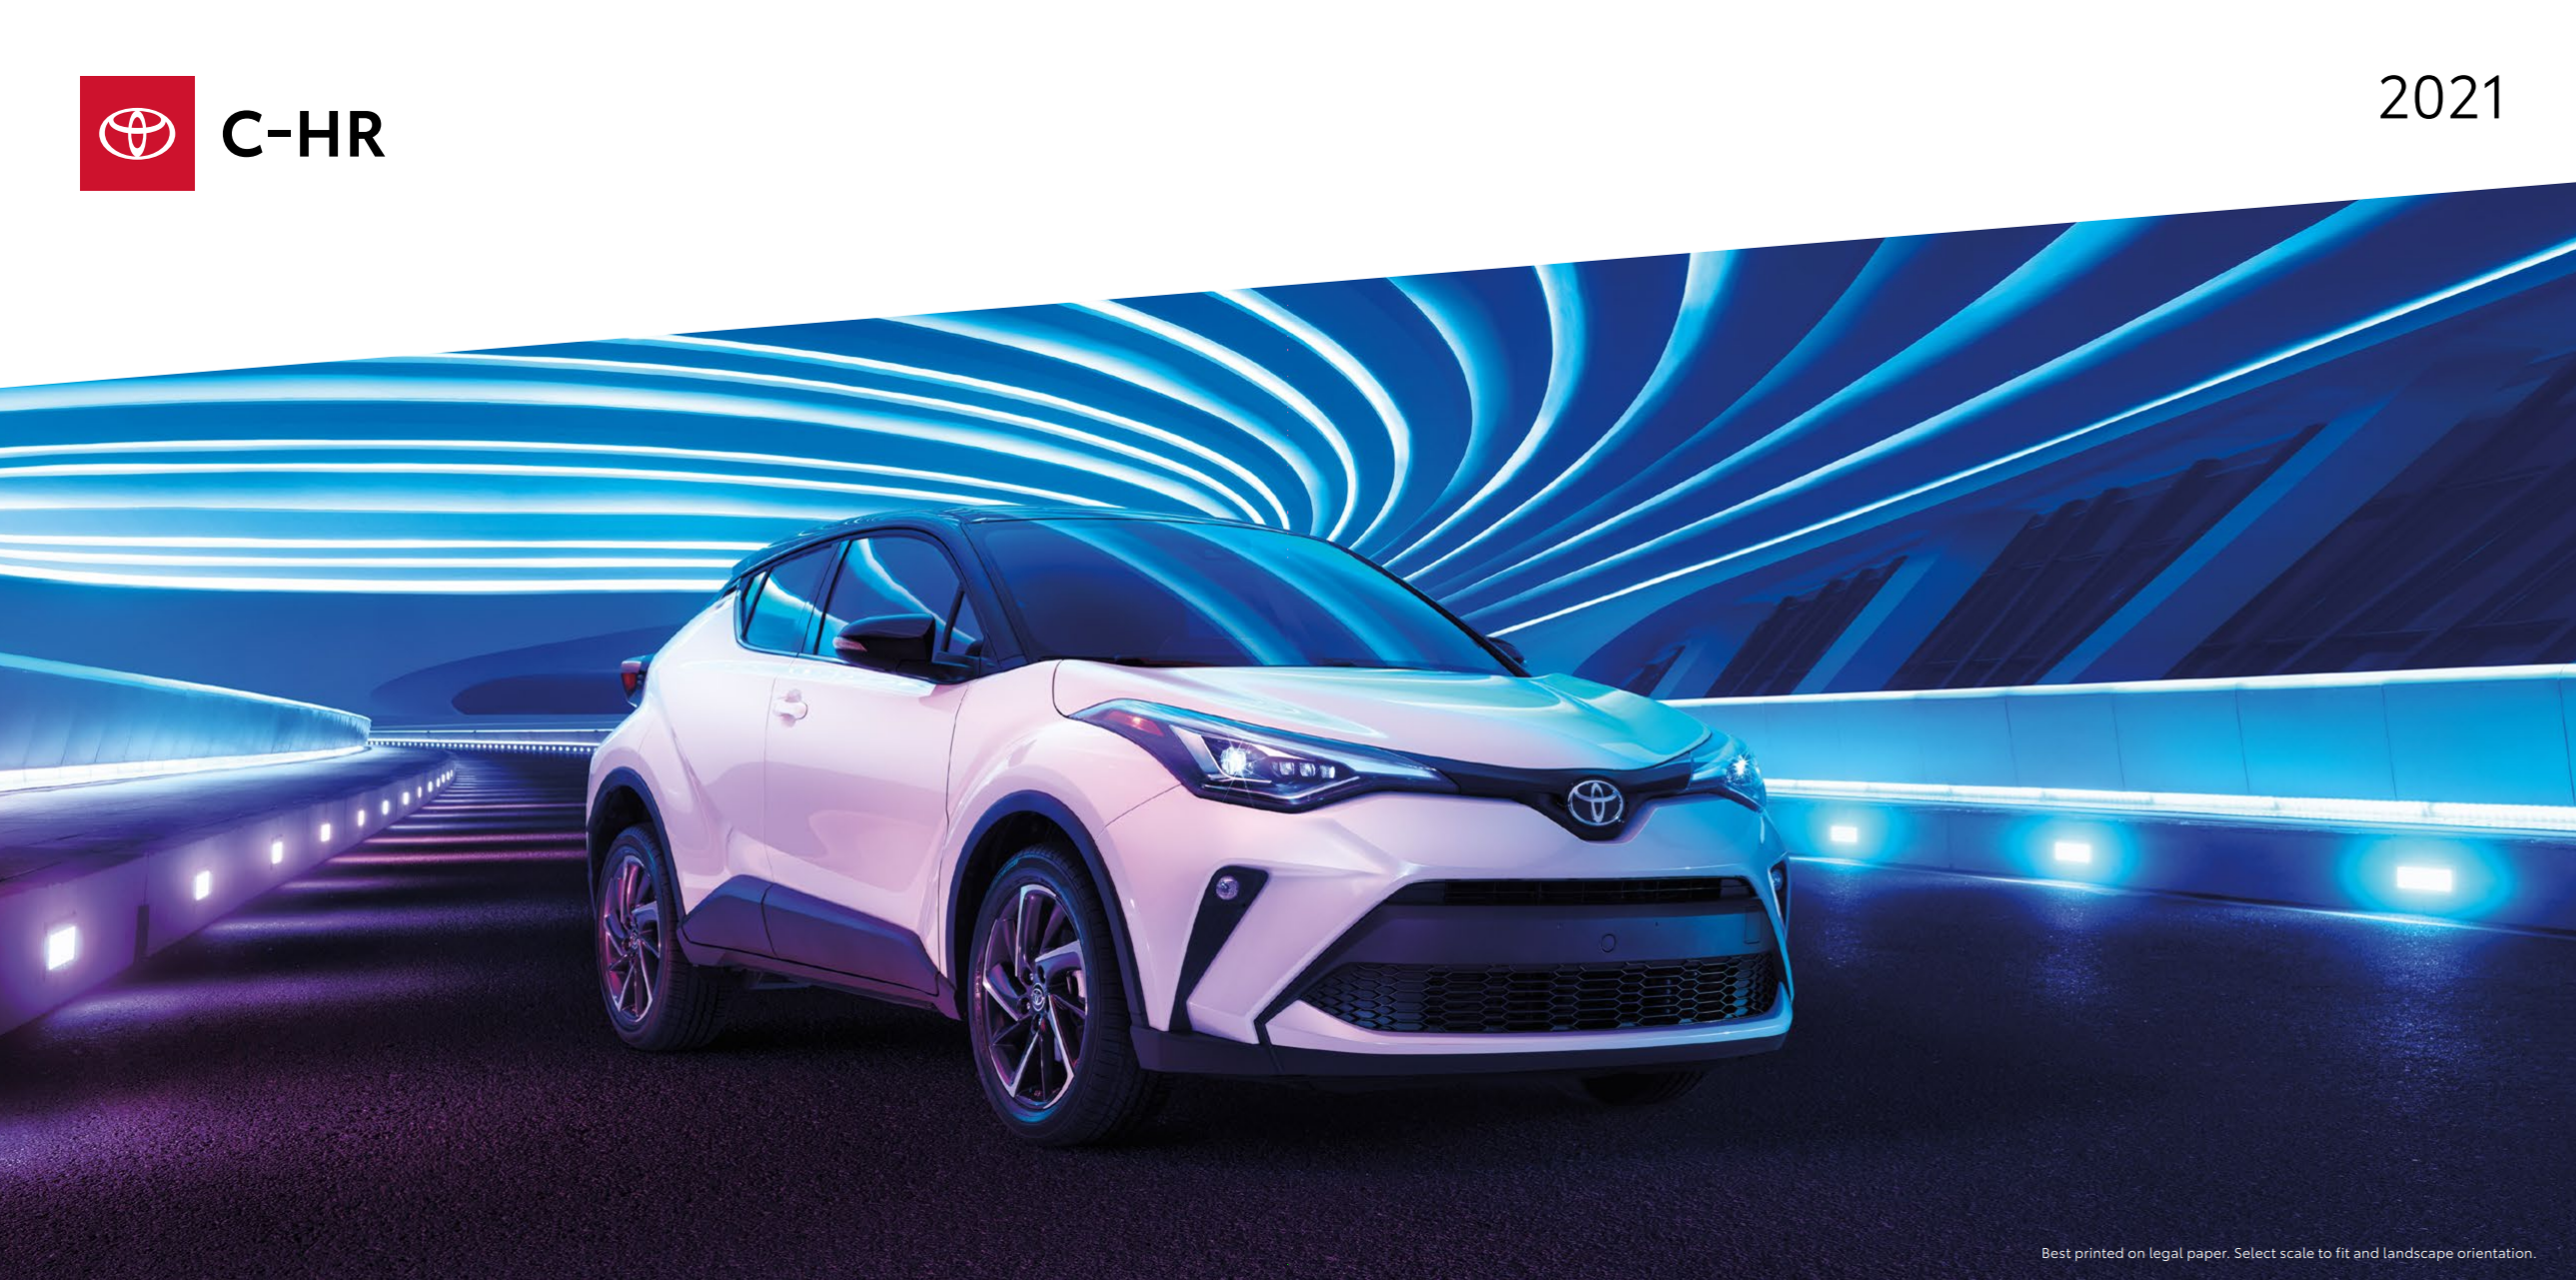 New 2021 Toyota C-HR Brochure at Falmouth Toyota Car Dealership - Bourne, MA - Serving Cape Cod, Hyannis, Plymouth, MA